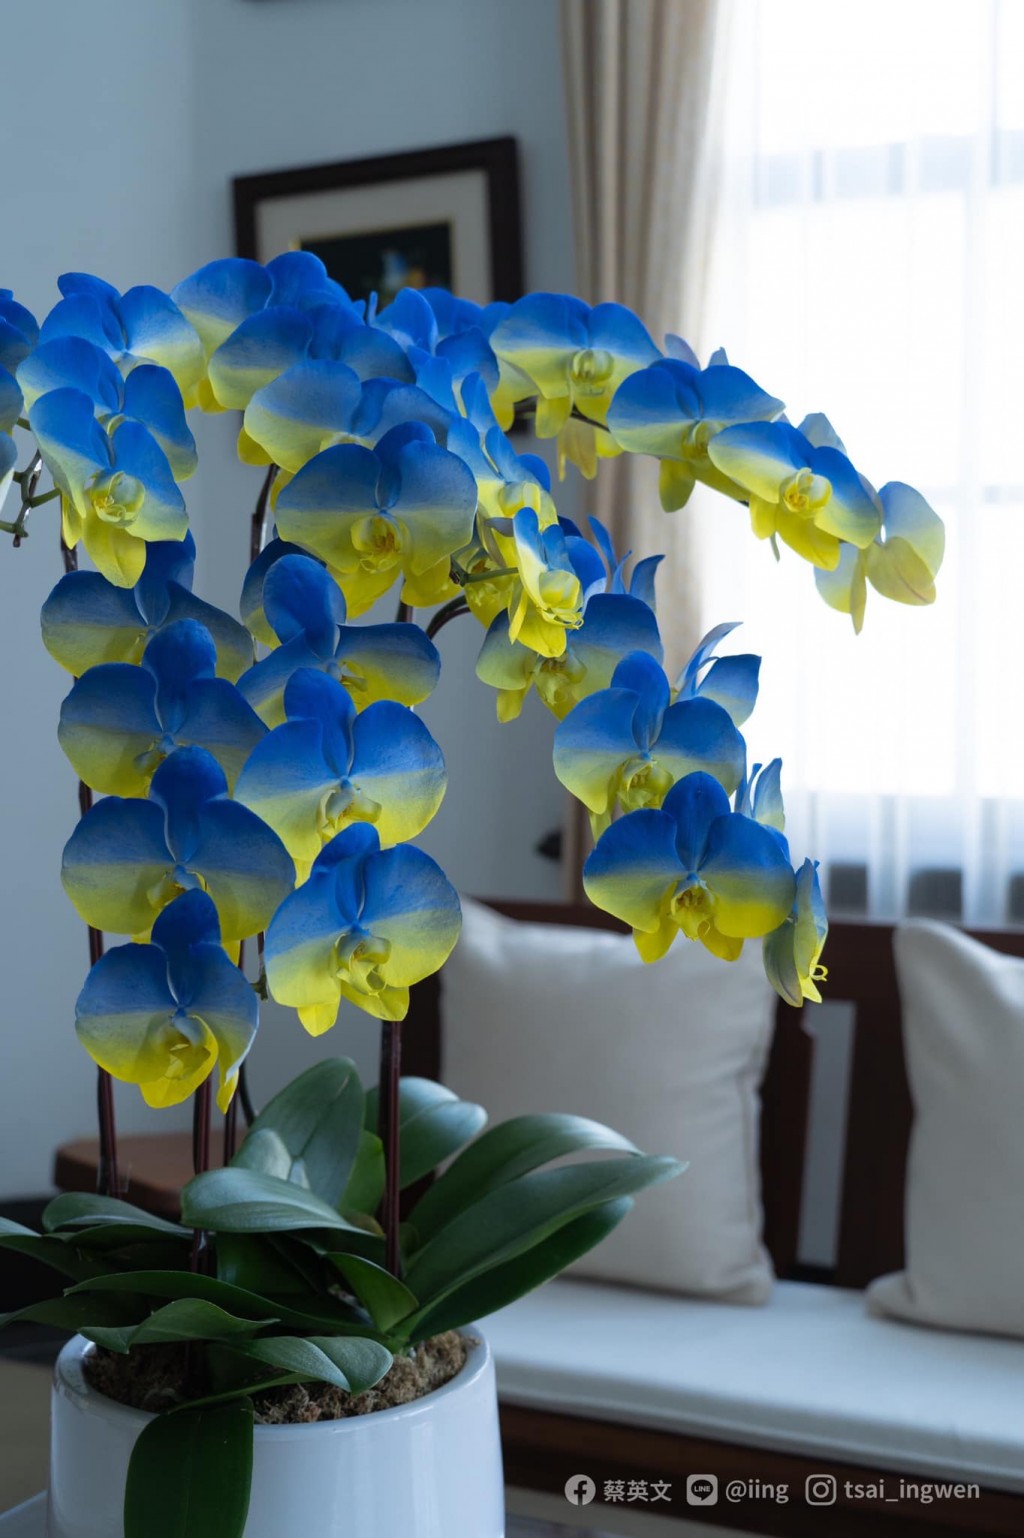 Photo of the Day: Taiwan orchids bloom with colors of Ukrainian flag